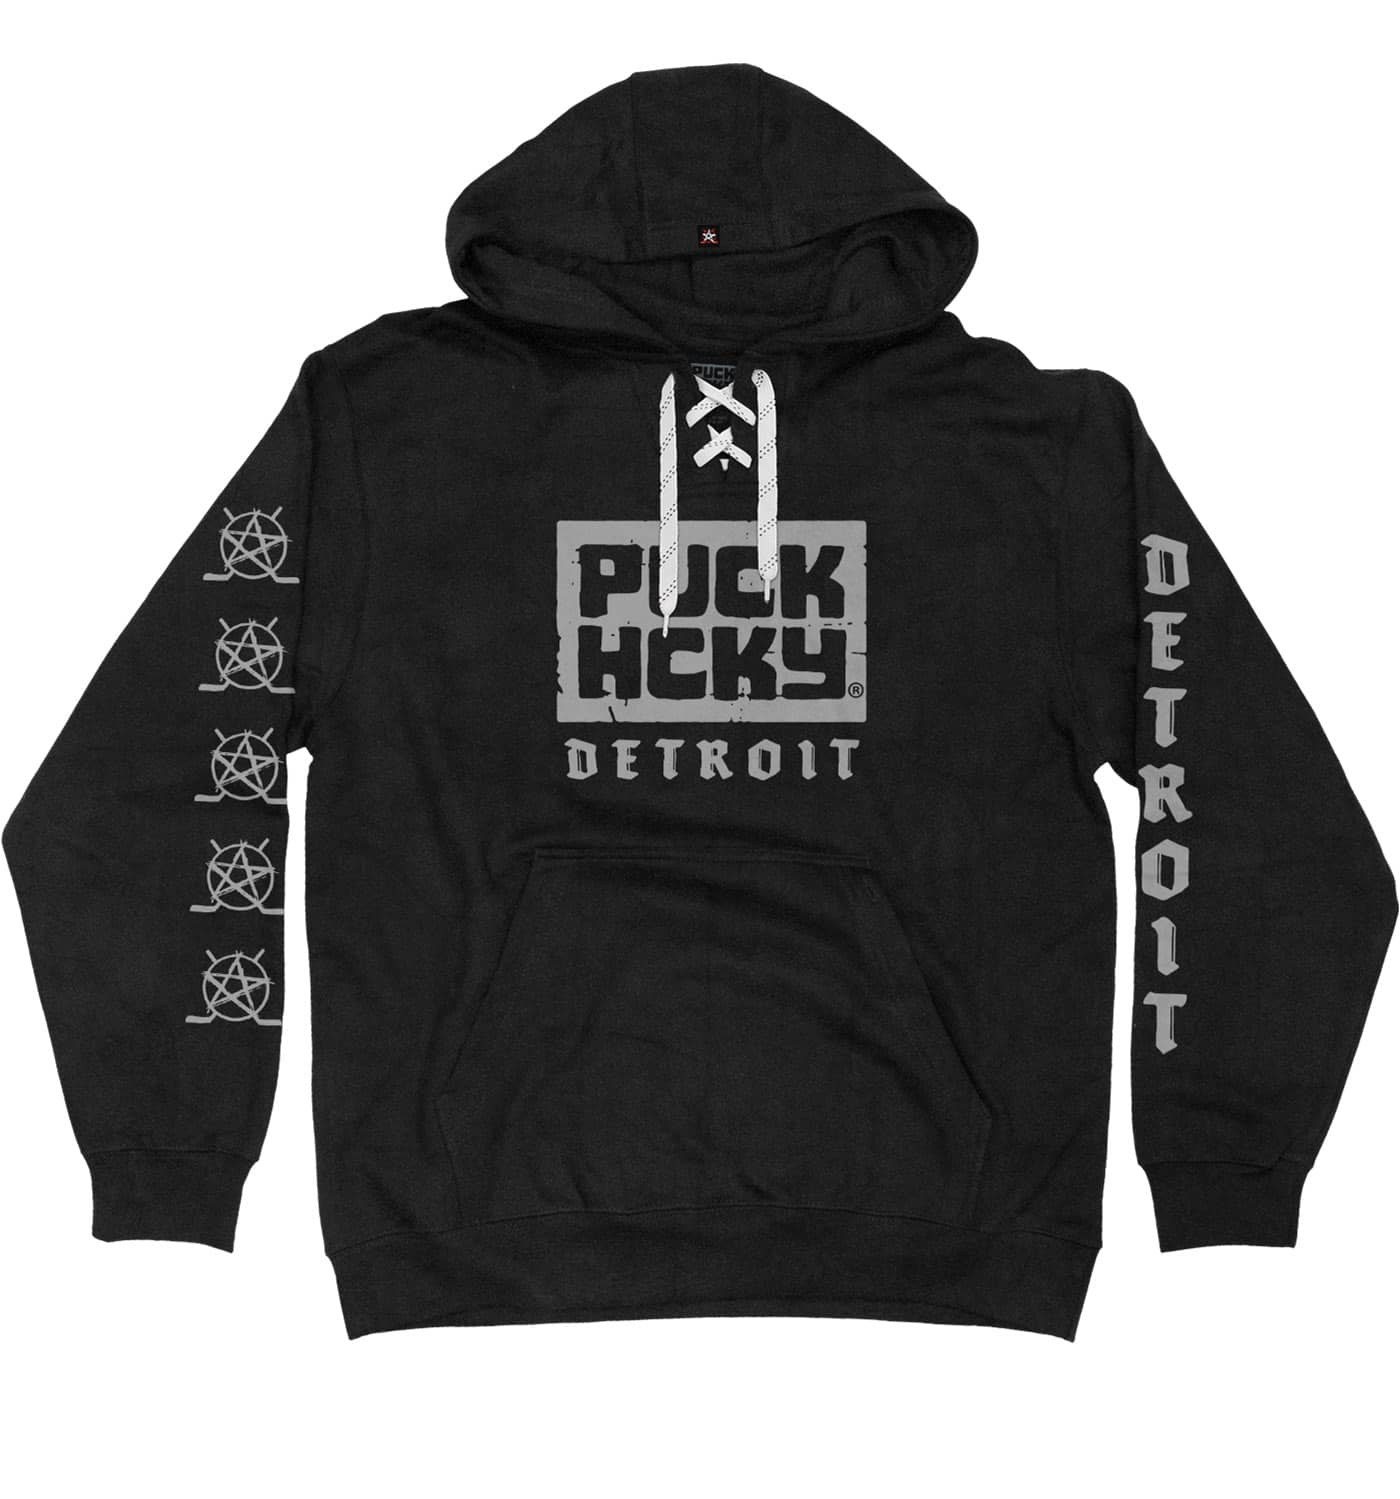 PUCK HCKY 'DETROIT' laced pullover hockey hoodie in black